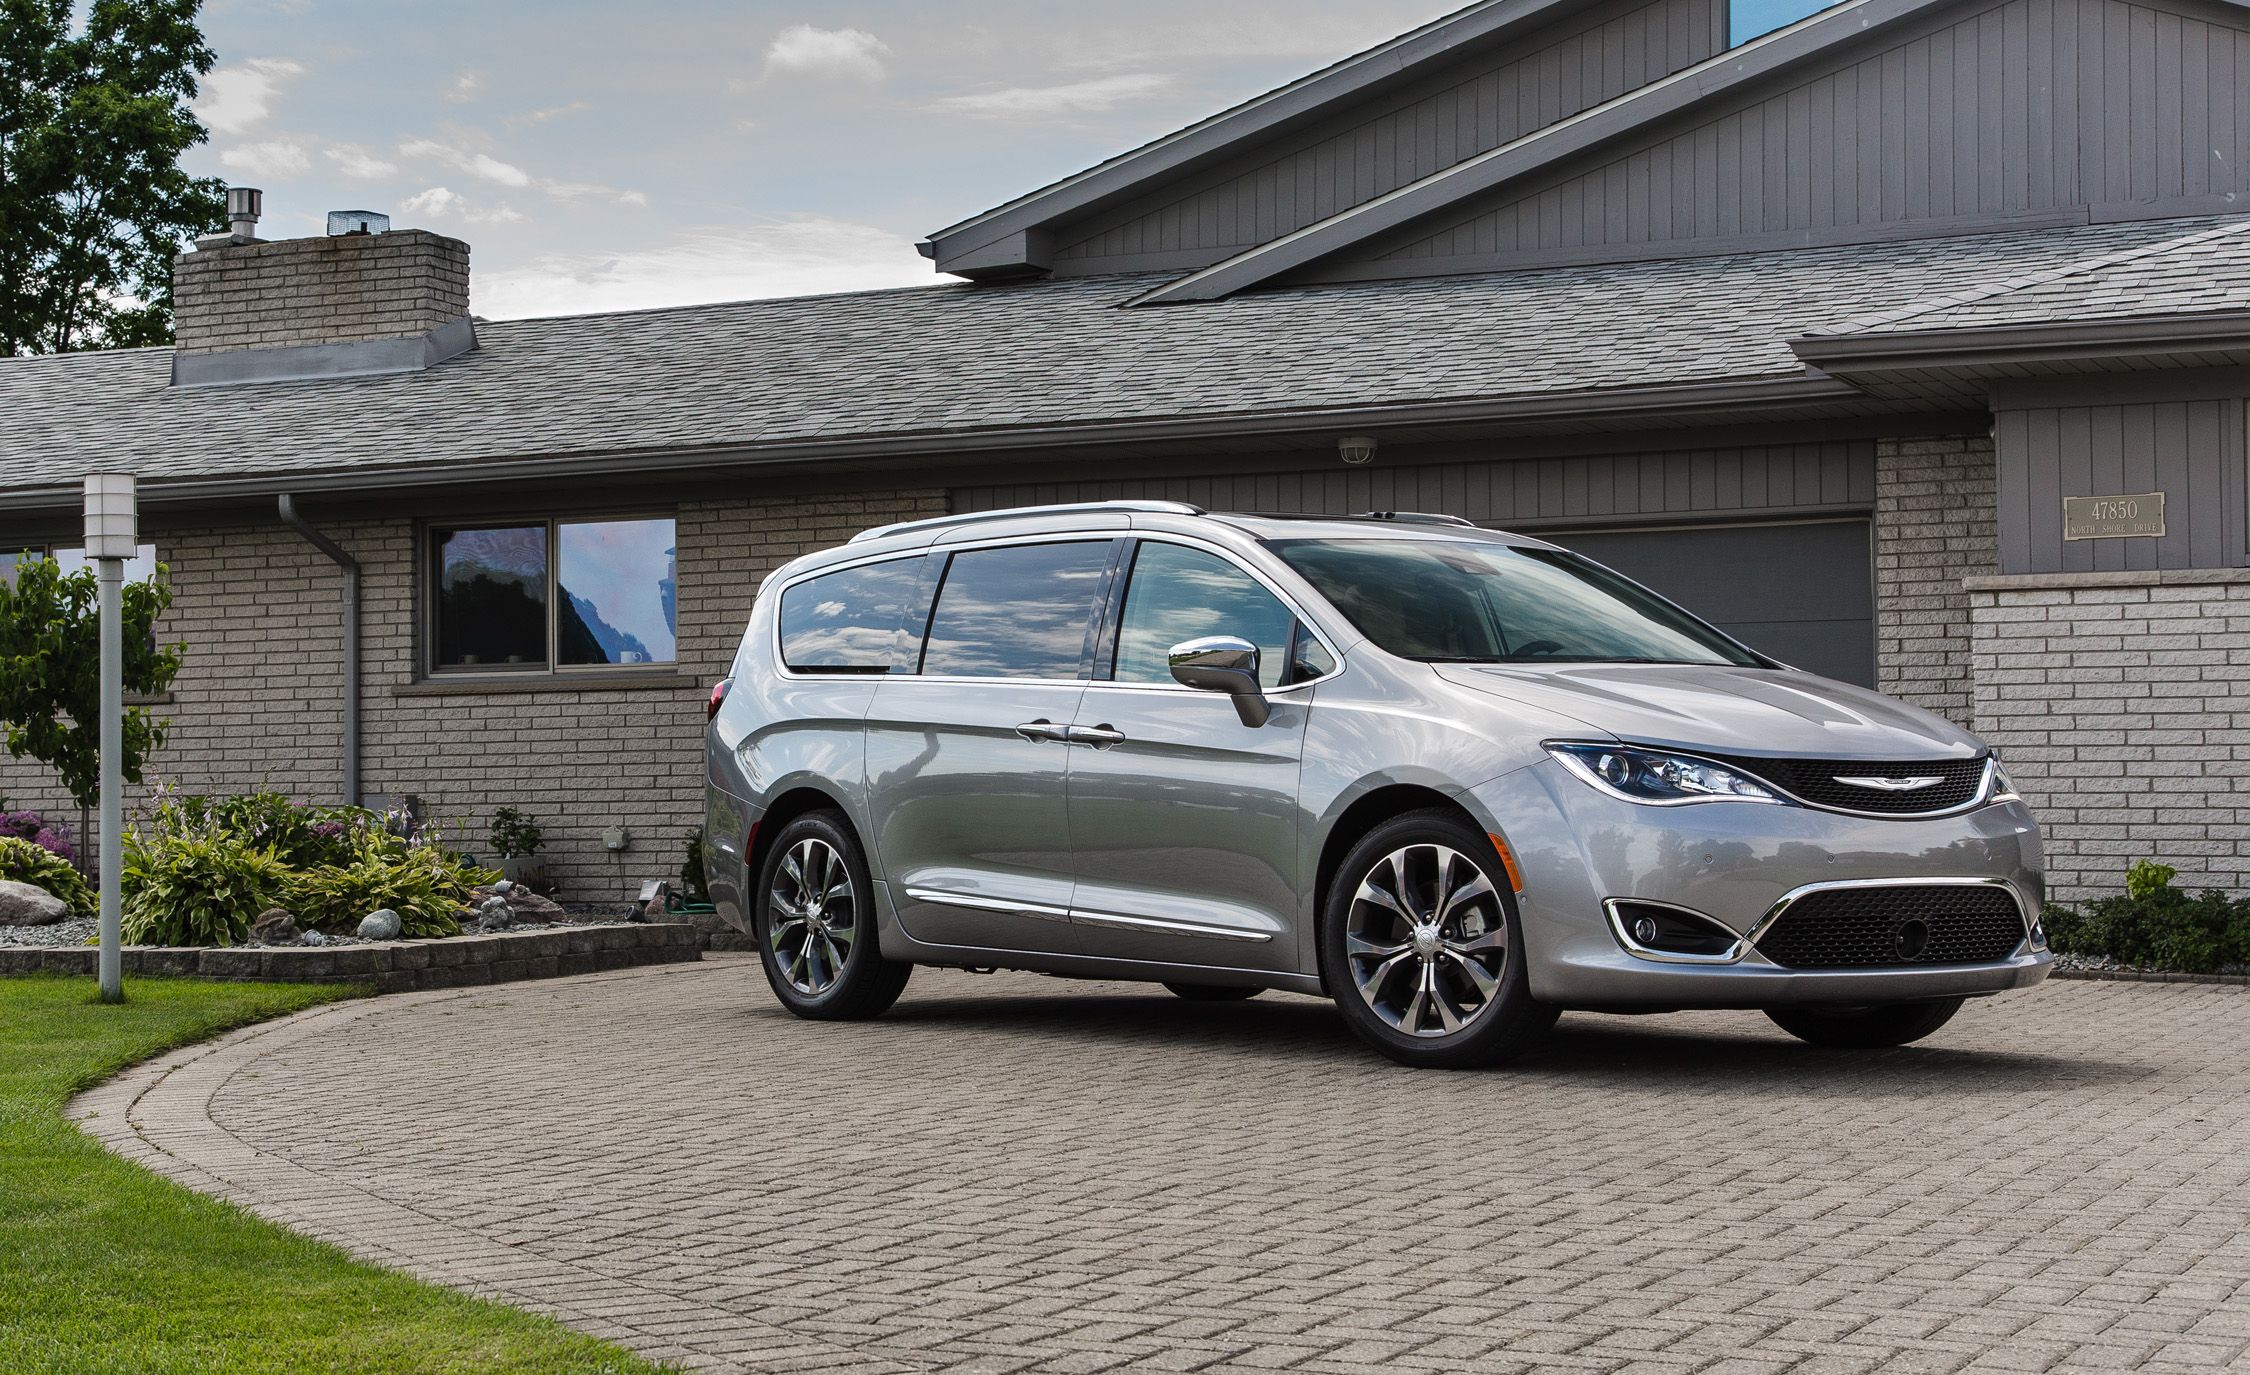 Chrysler Pacifica Reviews Chrysler Pacifica Price, Photos, and Specs